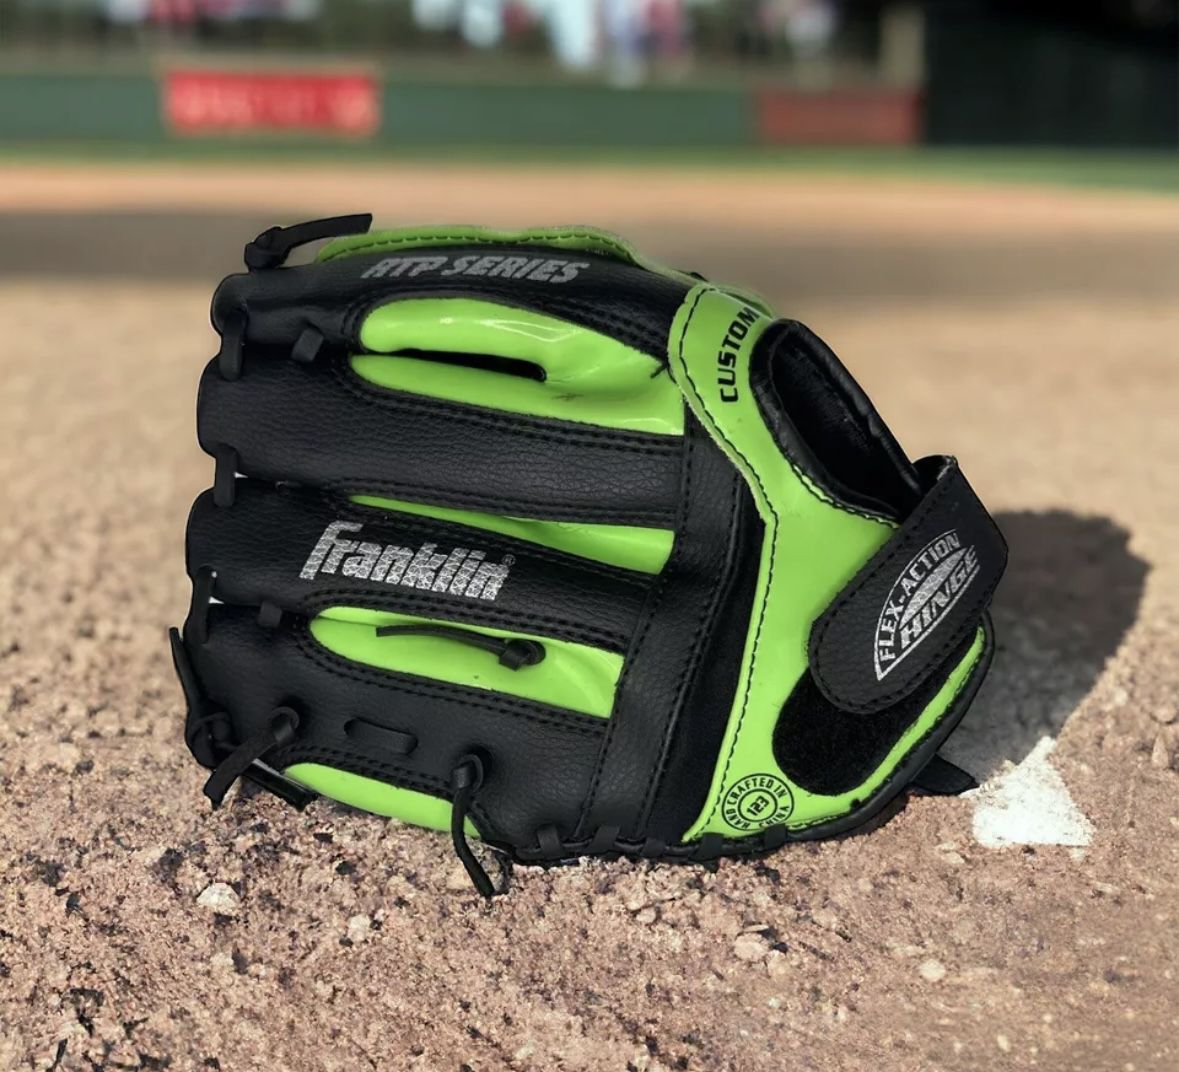 Franklin RTP Series 4612 - 9 1/2 inch Youth Baseball Glove Right Handed Thrower